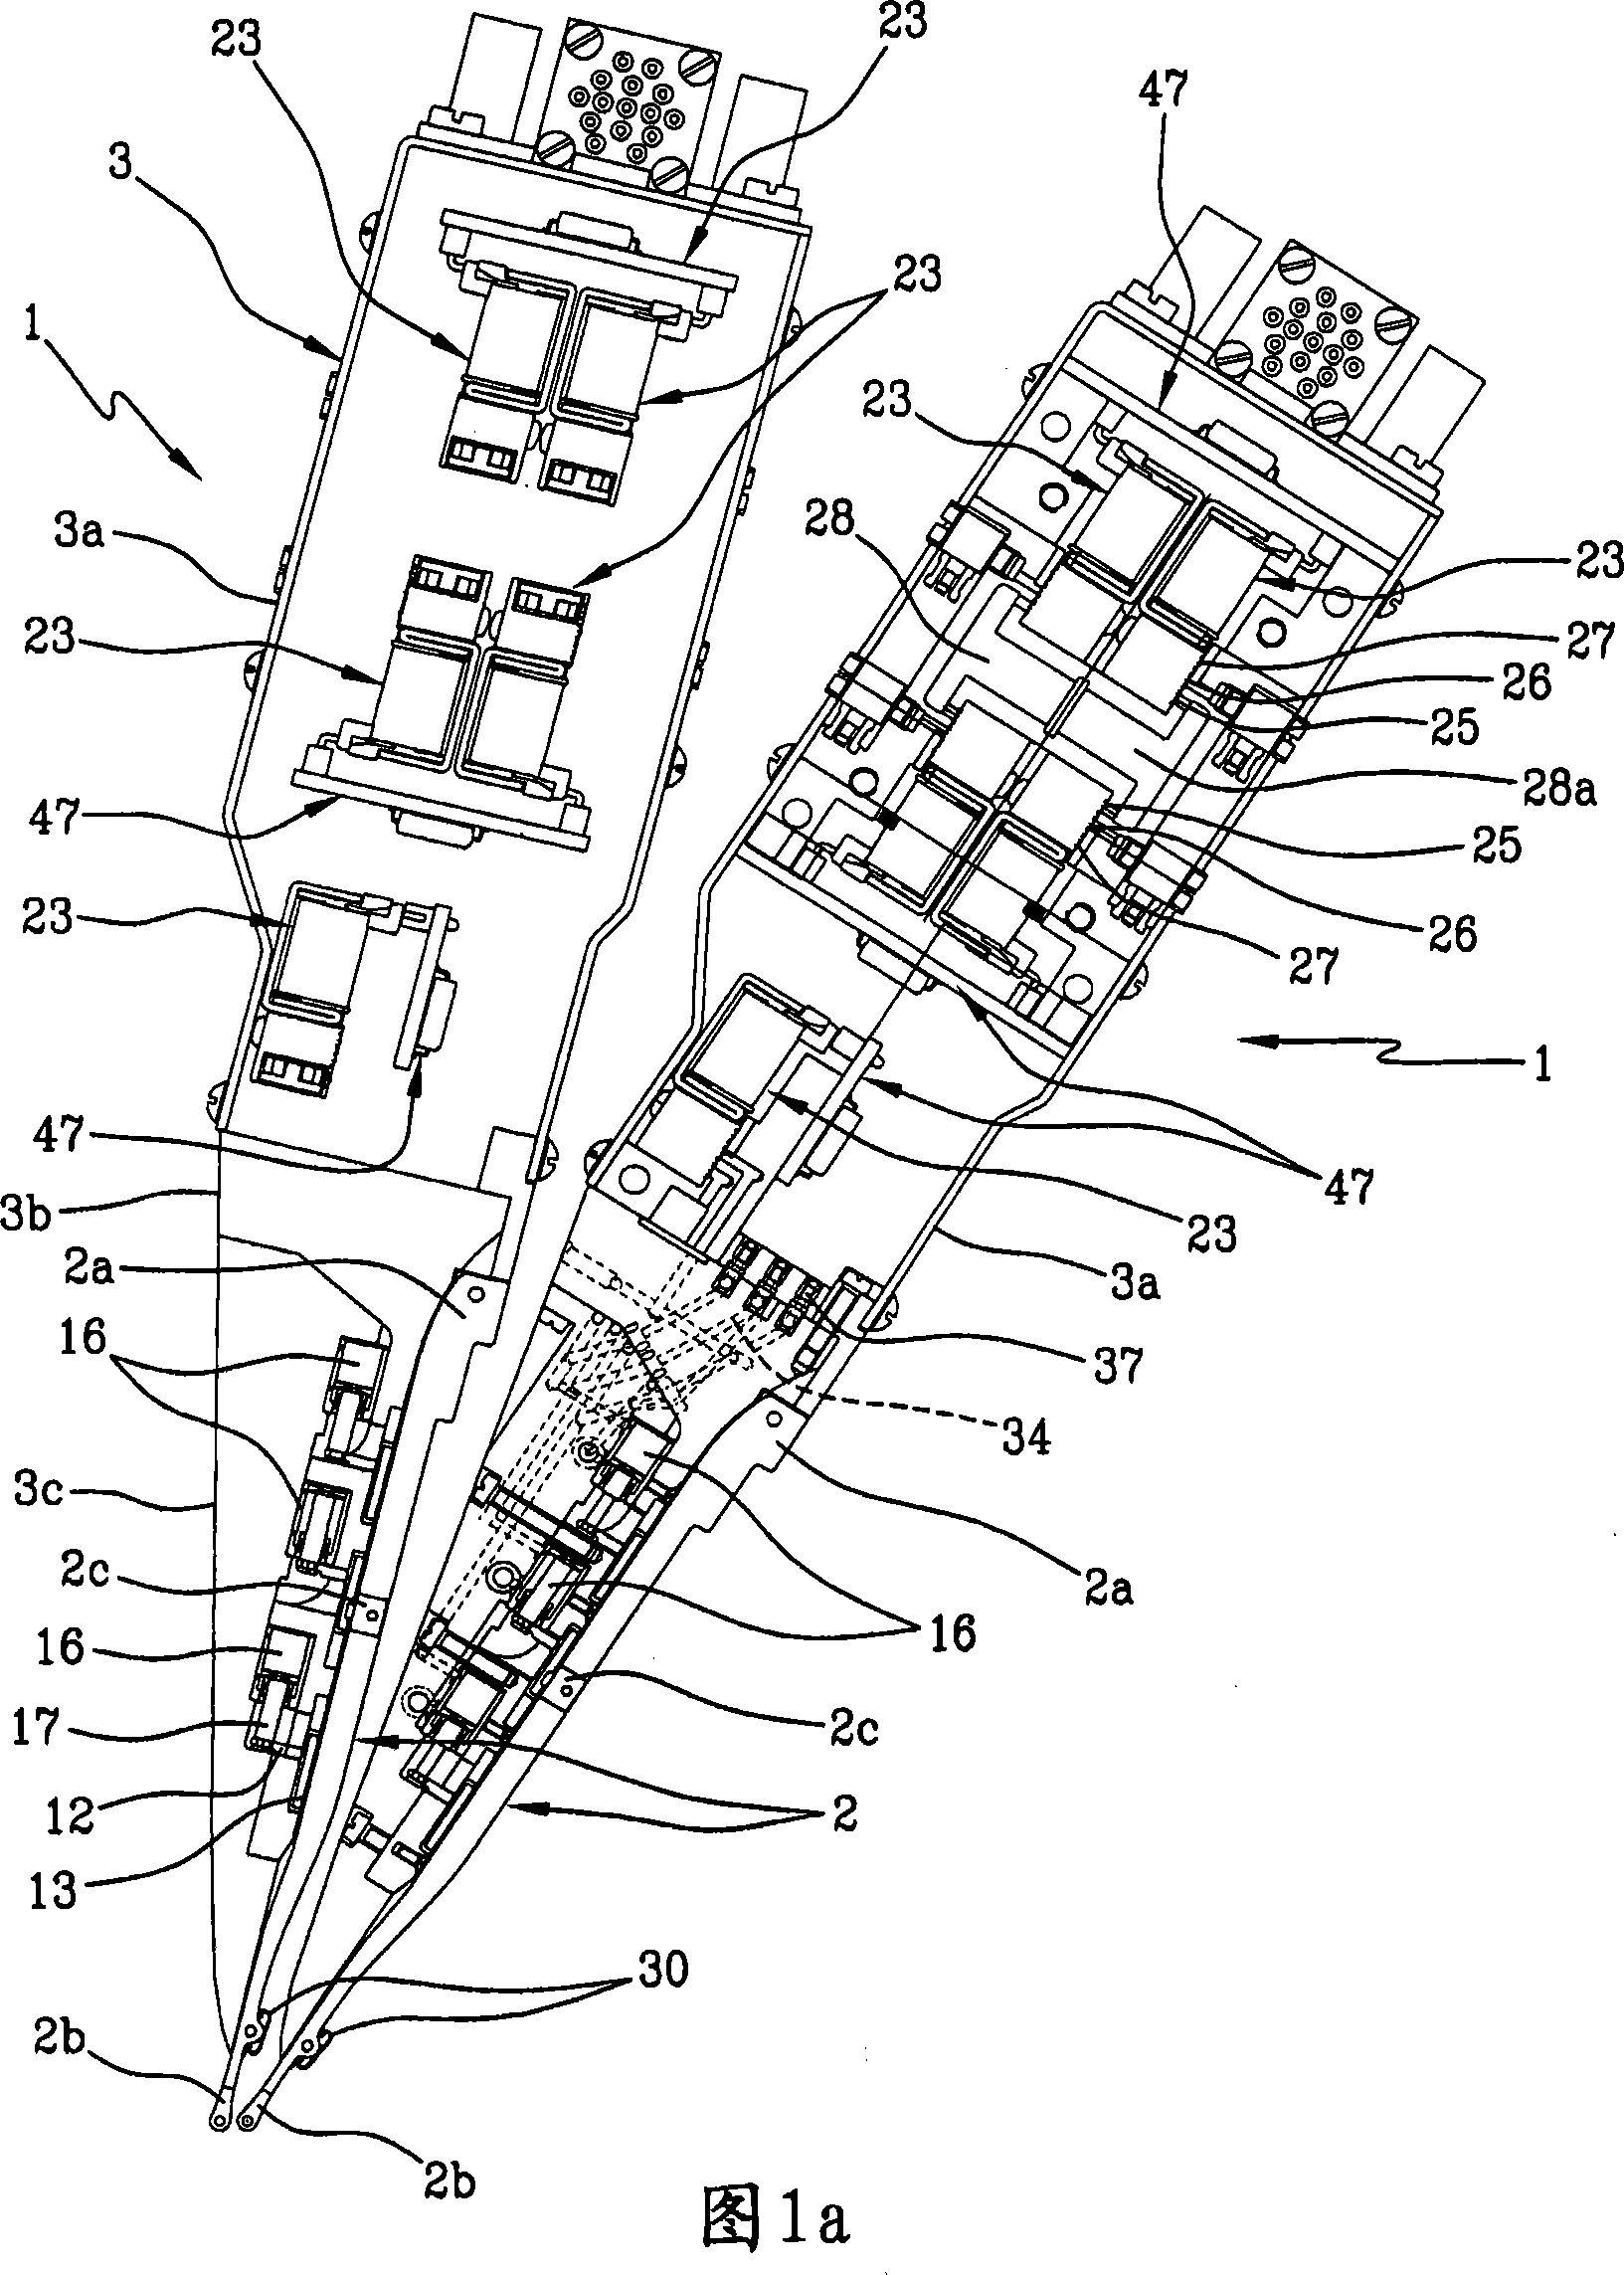 Jacquard device to selectively shift thread guides in a textile machine